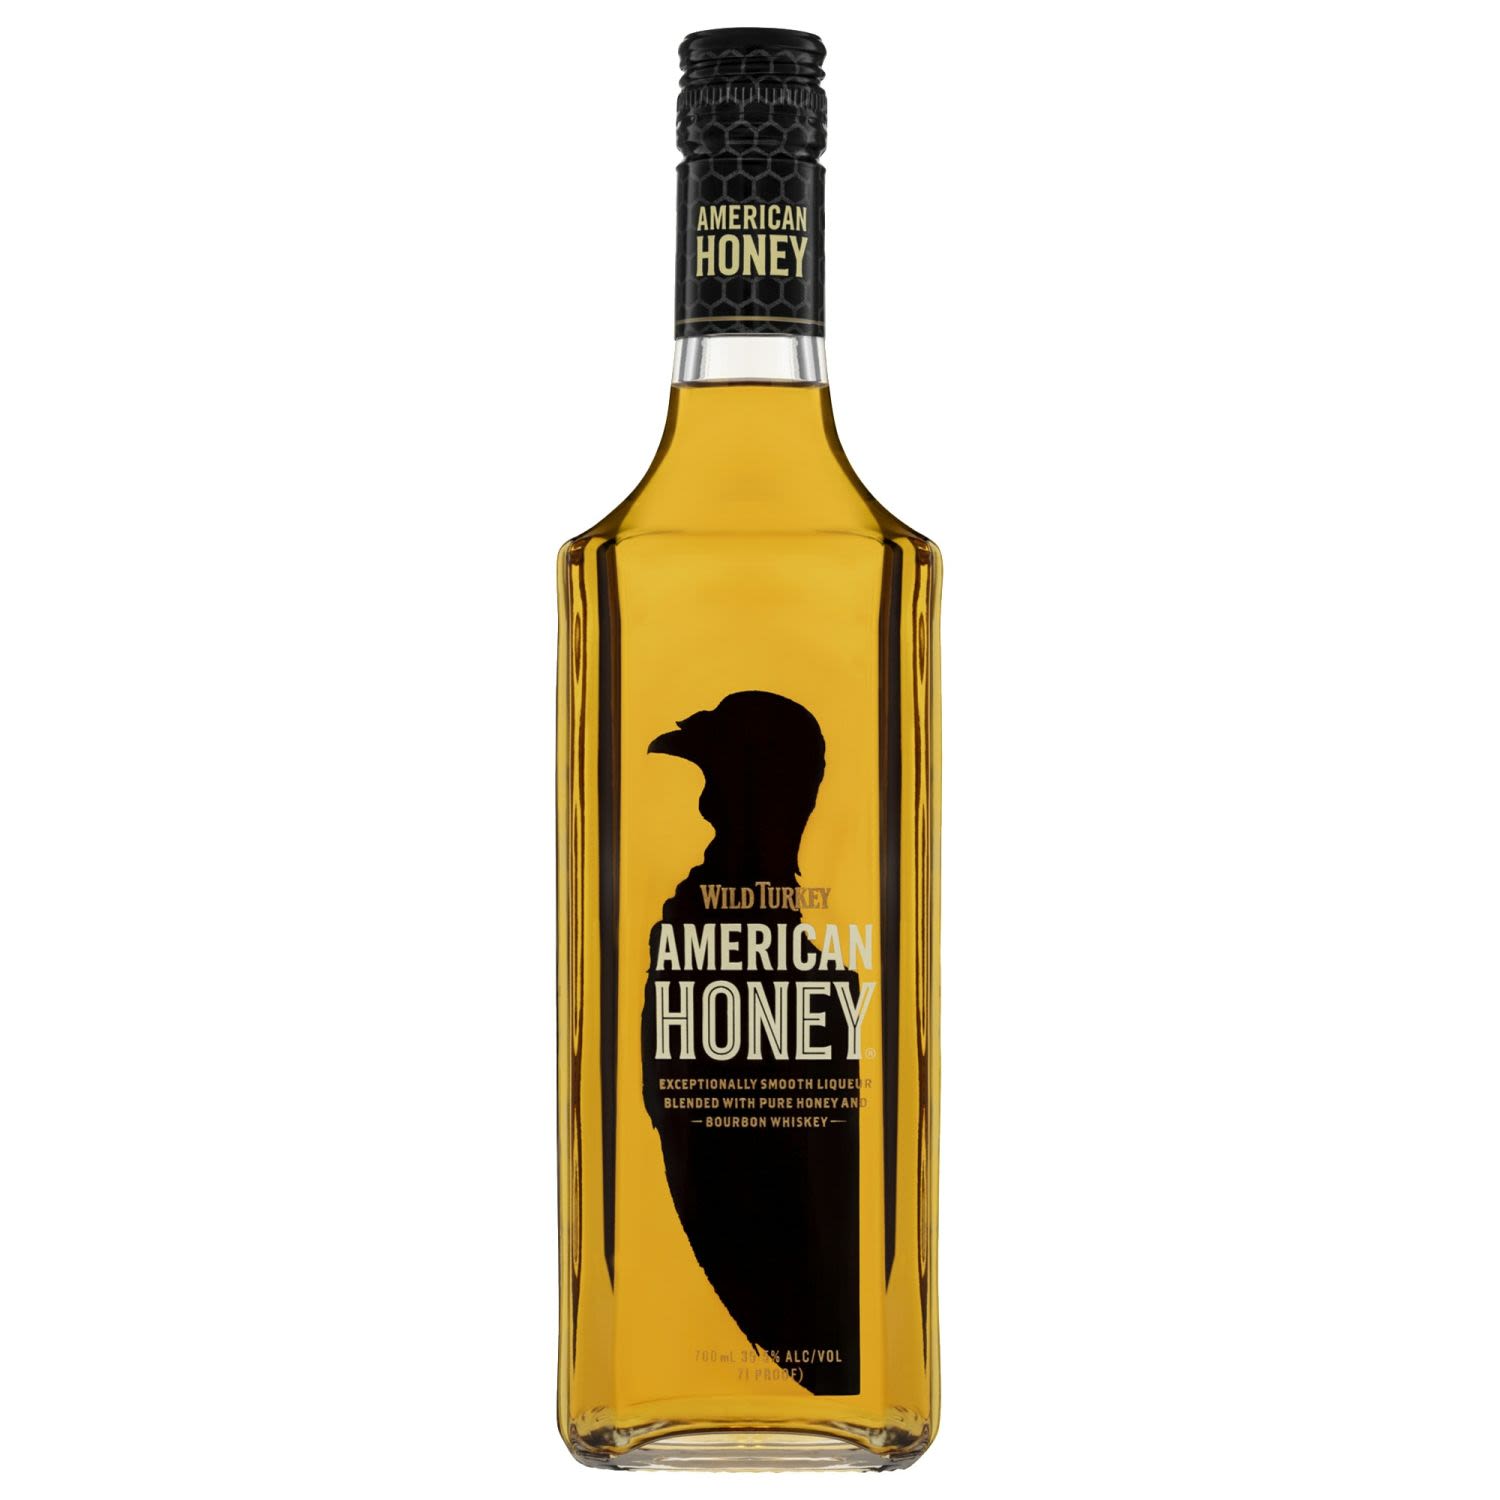 Wild Turkey American Honey Liqueur is a smooth Bourbon that is blended with wild honey for that rich natural sweetness. For lovers of Bourbon Whiskey but with a touch more richness and a long sweet finish with sublime texture. Not only fantastic to drink neat, Wild Turkey American Honey is a perfect addition to many premium cocktails.<br /> <br />Alcohol Volume: 35.50%<br /><br />Pack Format: Bottle<br /><br />Standard Drinks: 19.6</br /><br />Pack Type: Bottle<br /><br />Country of Origin: USA<br />